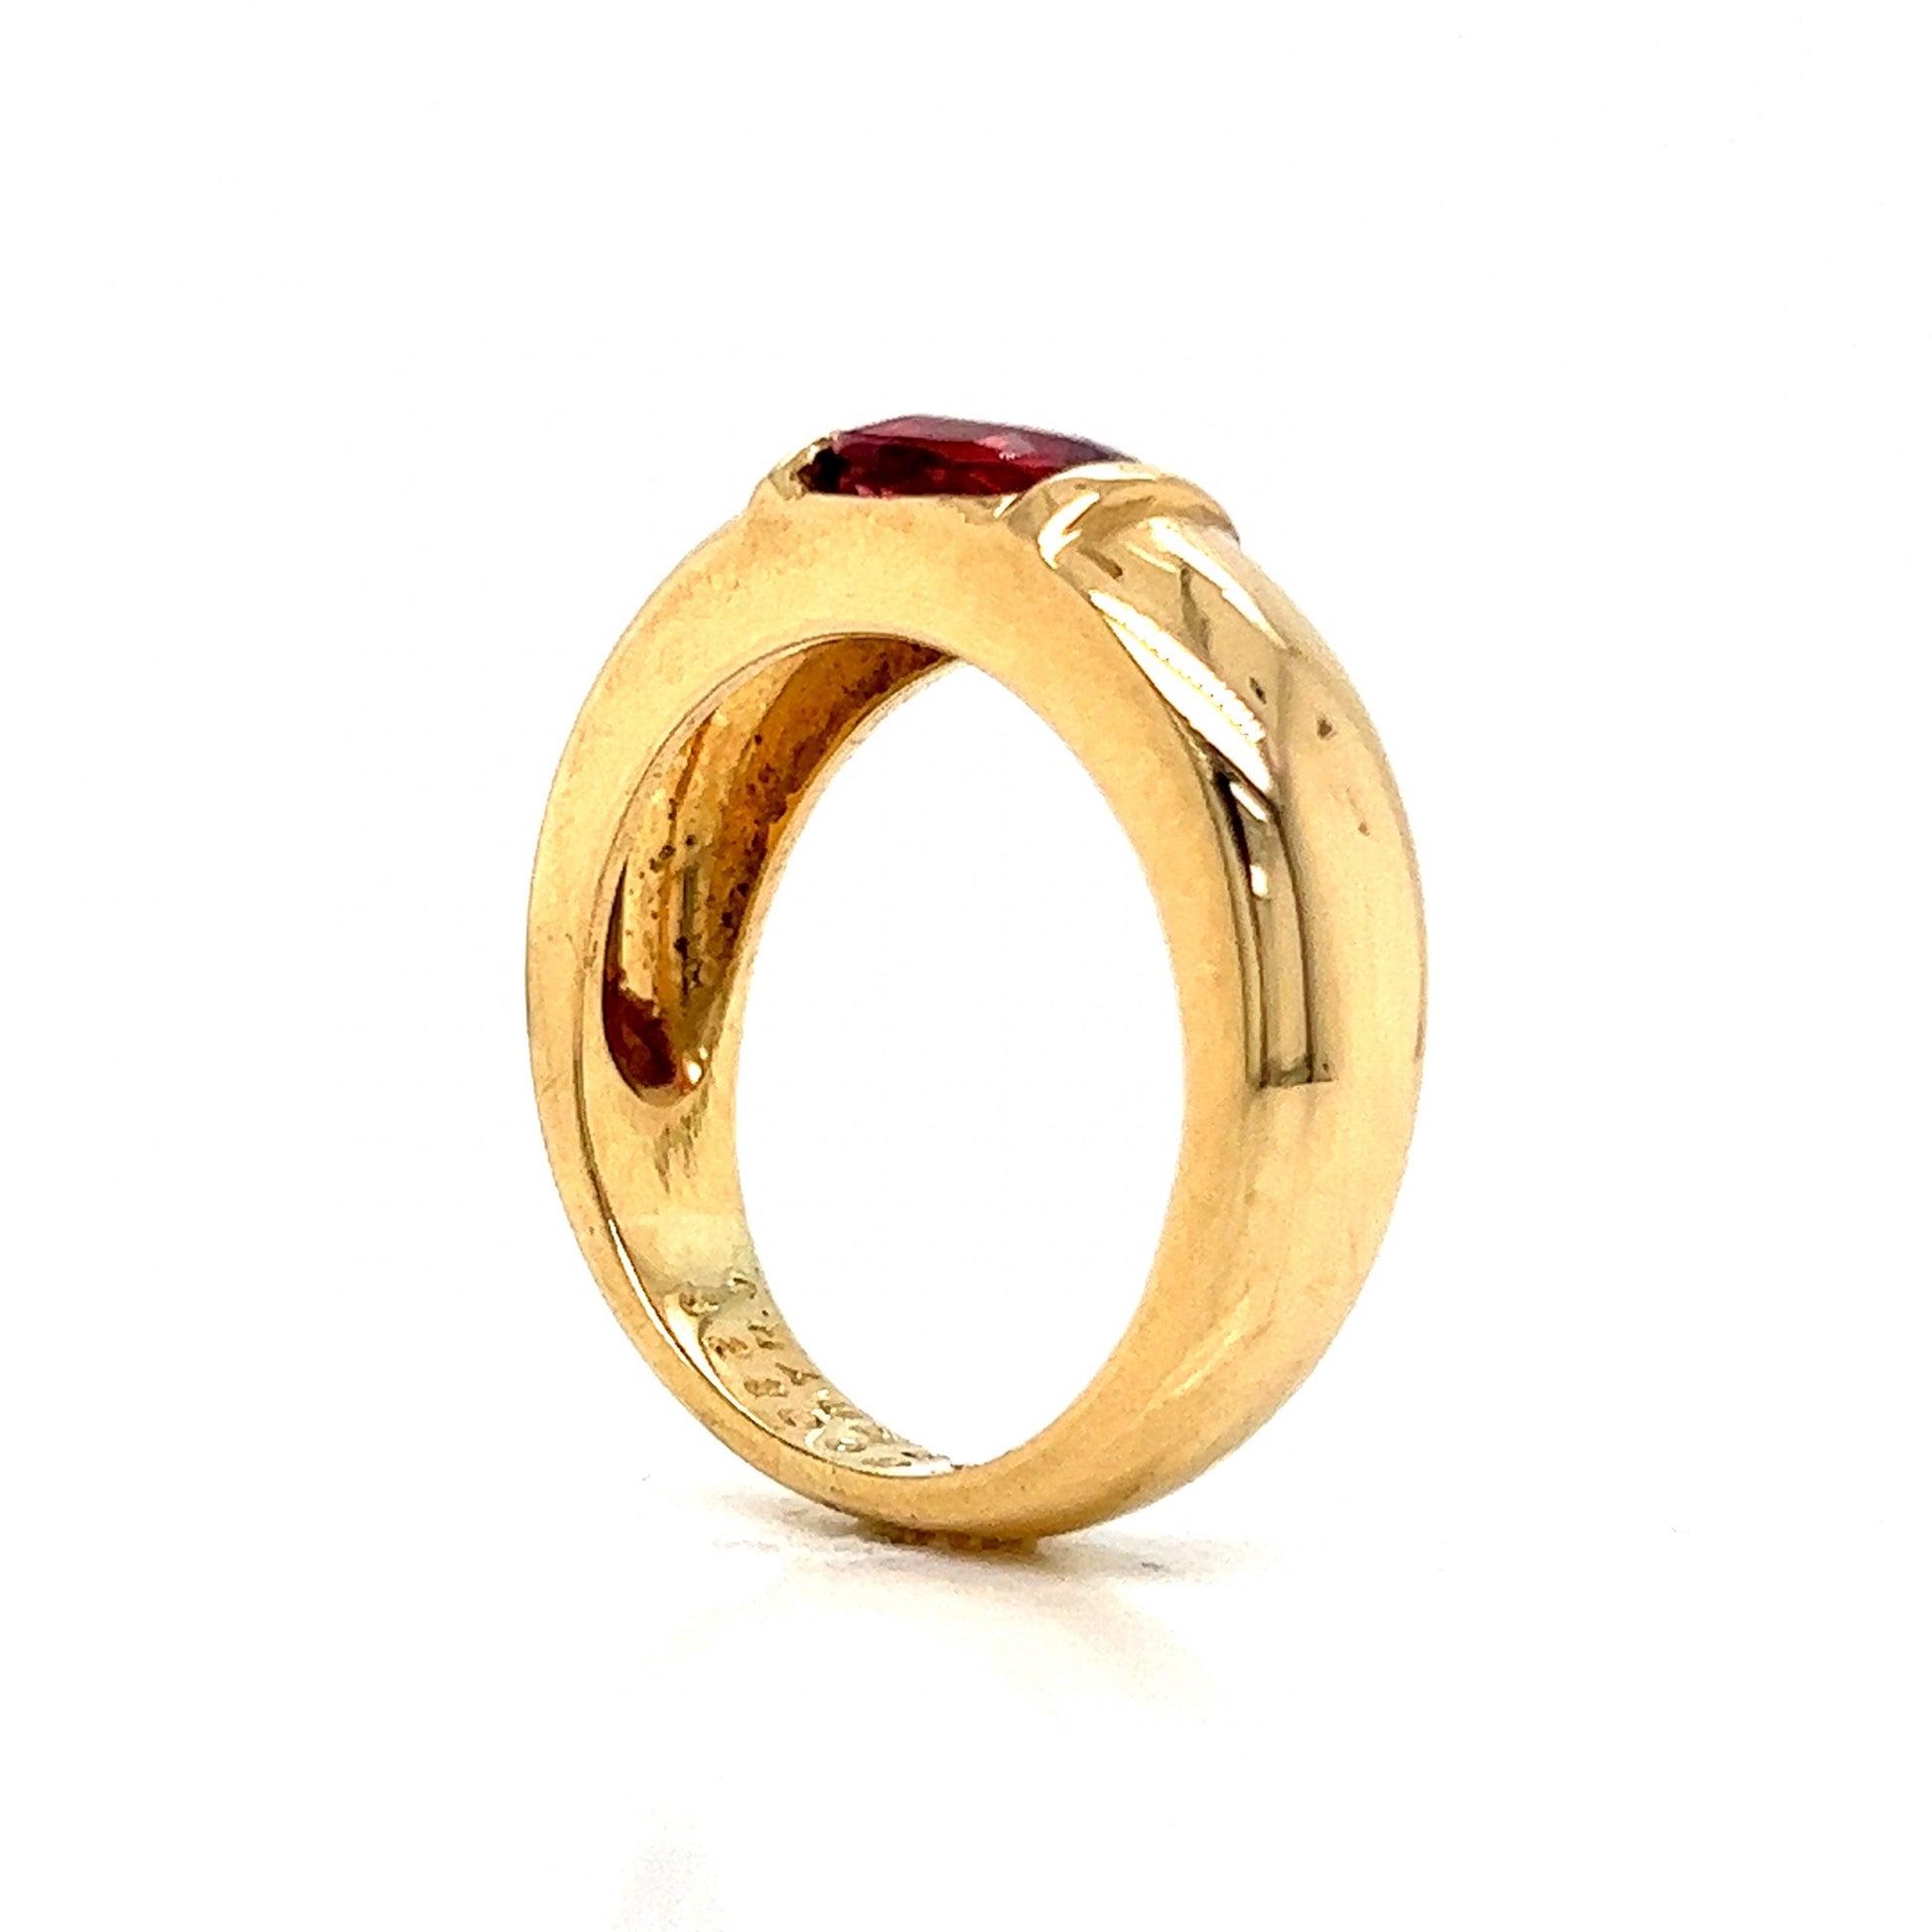 Chaumet Oval Cut Pink Tourmaline Ring in 18k Yellow Gold